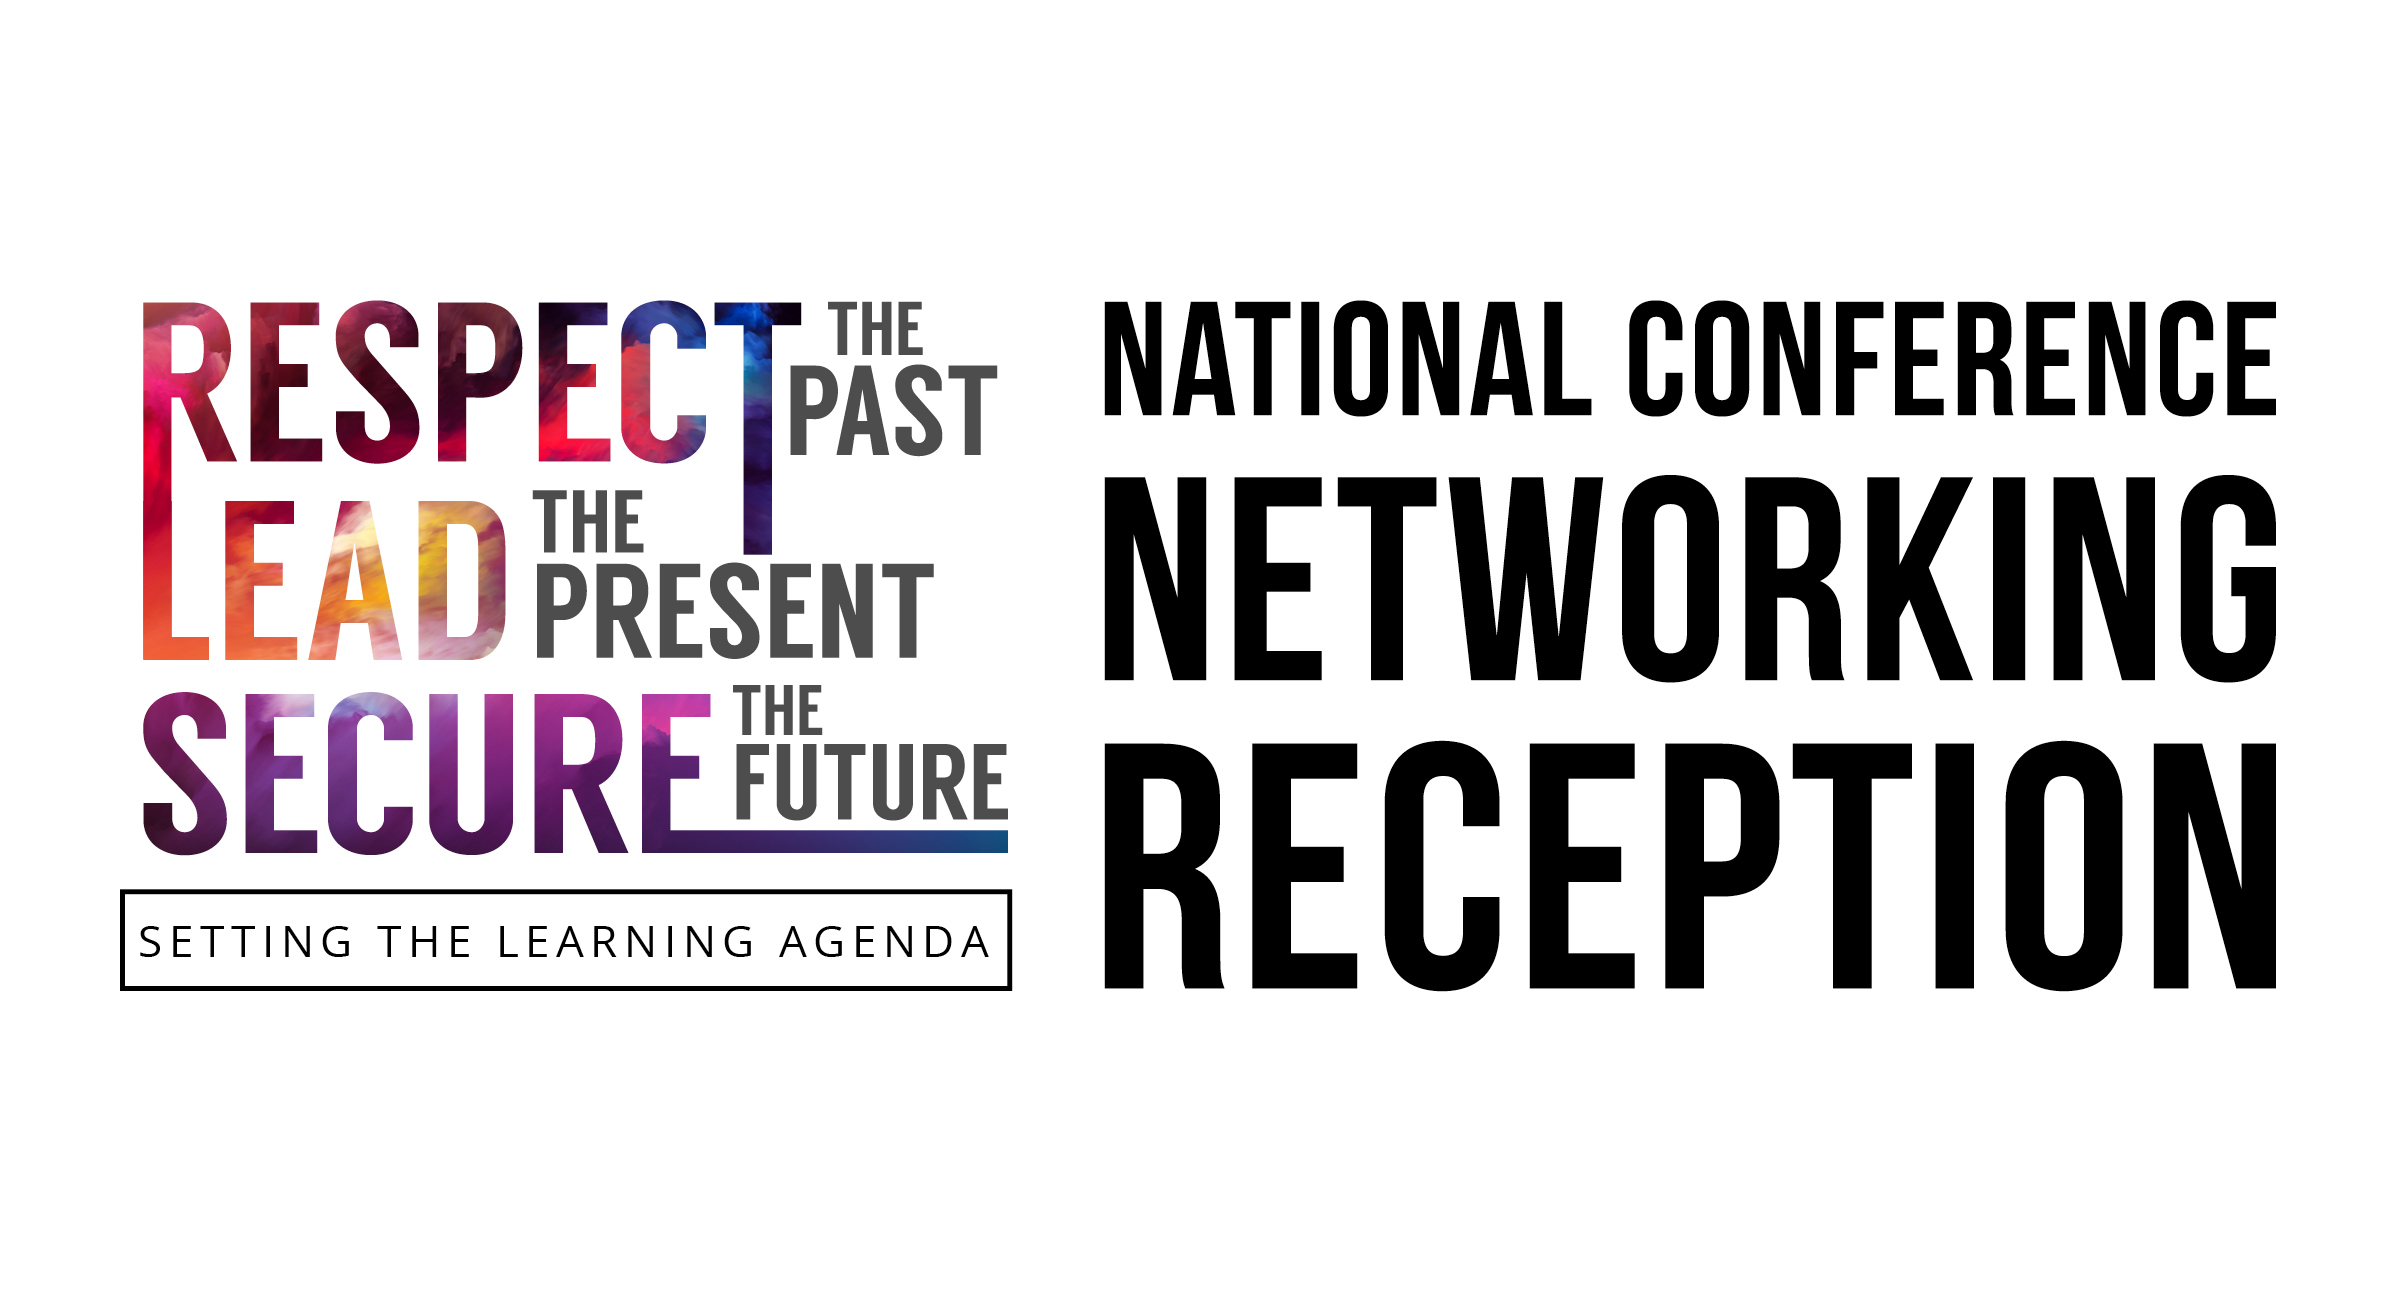 ACEL National Conference Networking Reception